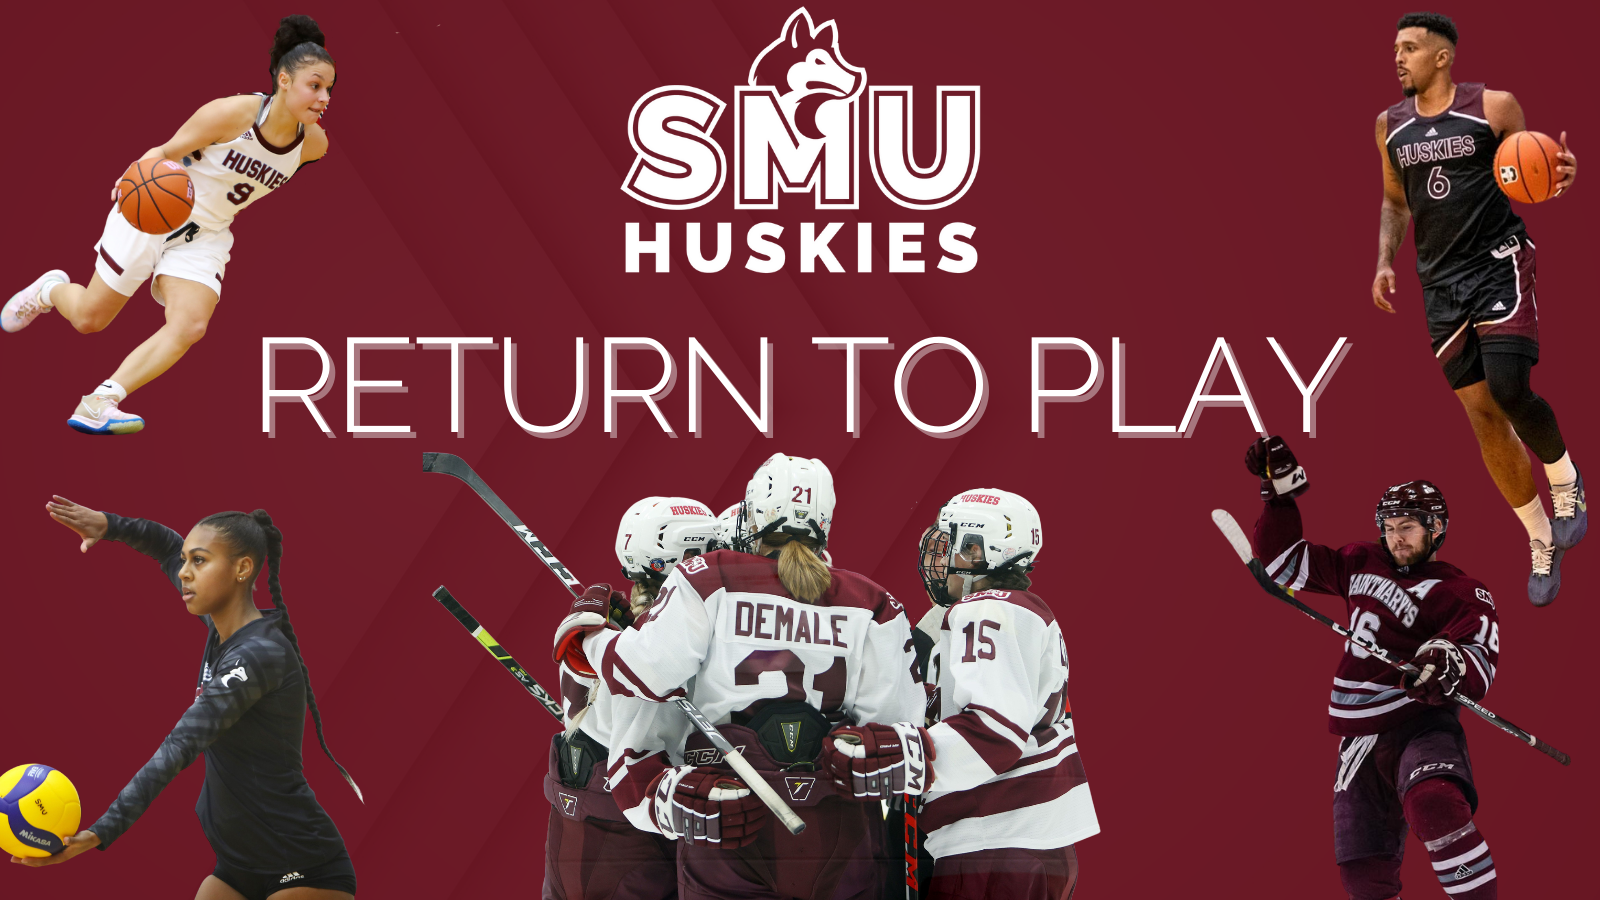 Huskies to return to play Feb. 18, as AUS releases schedule